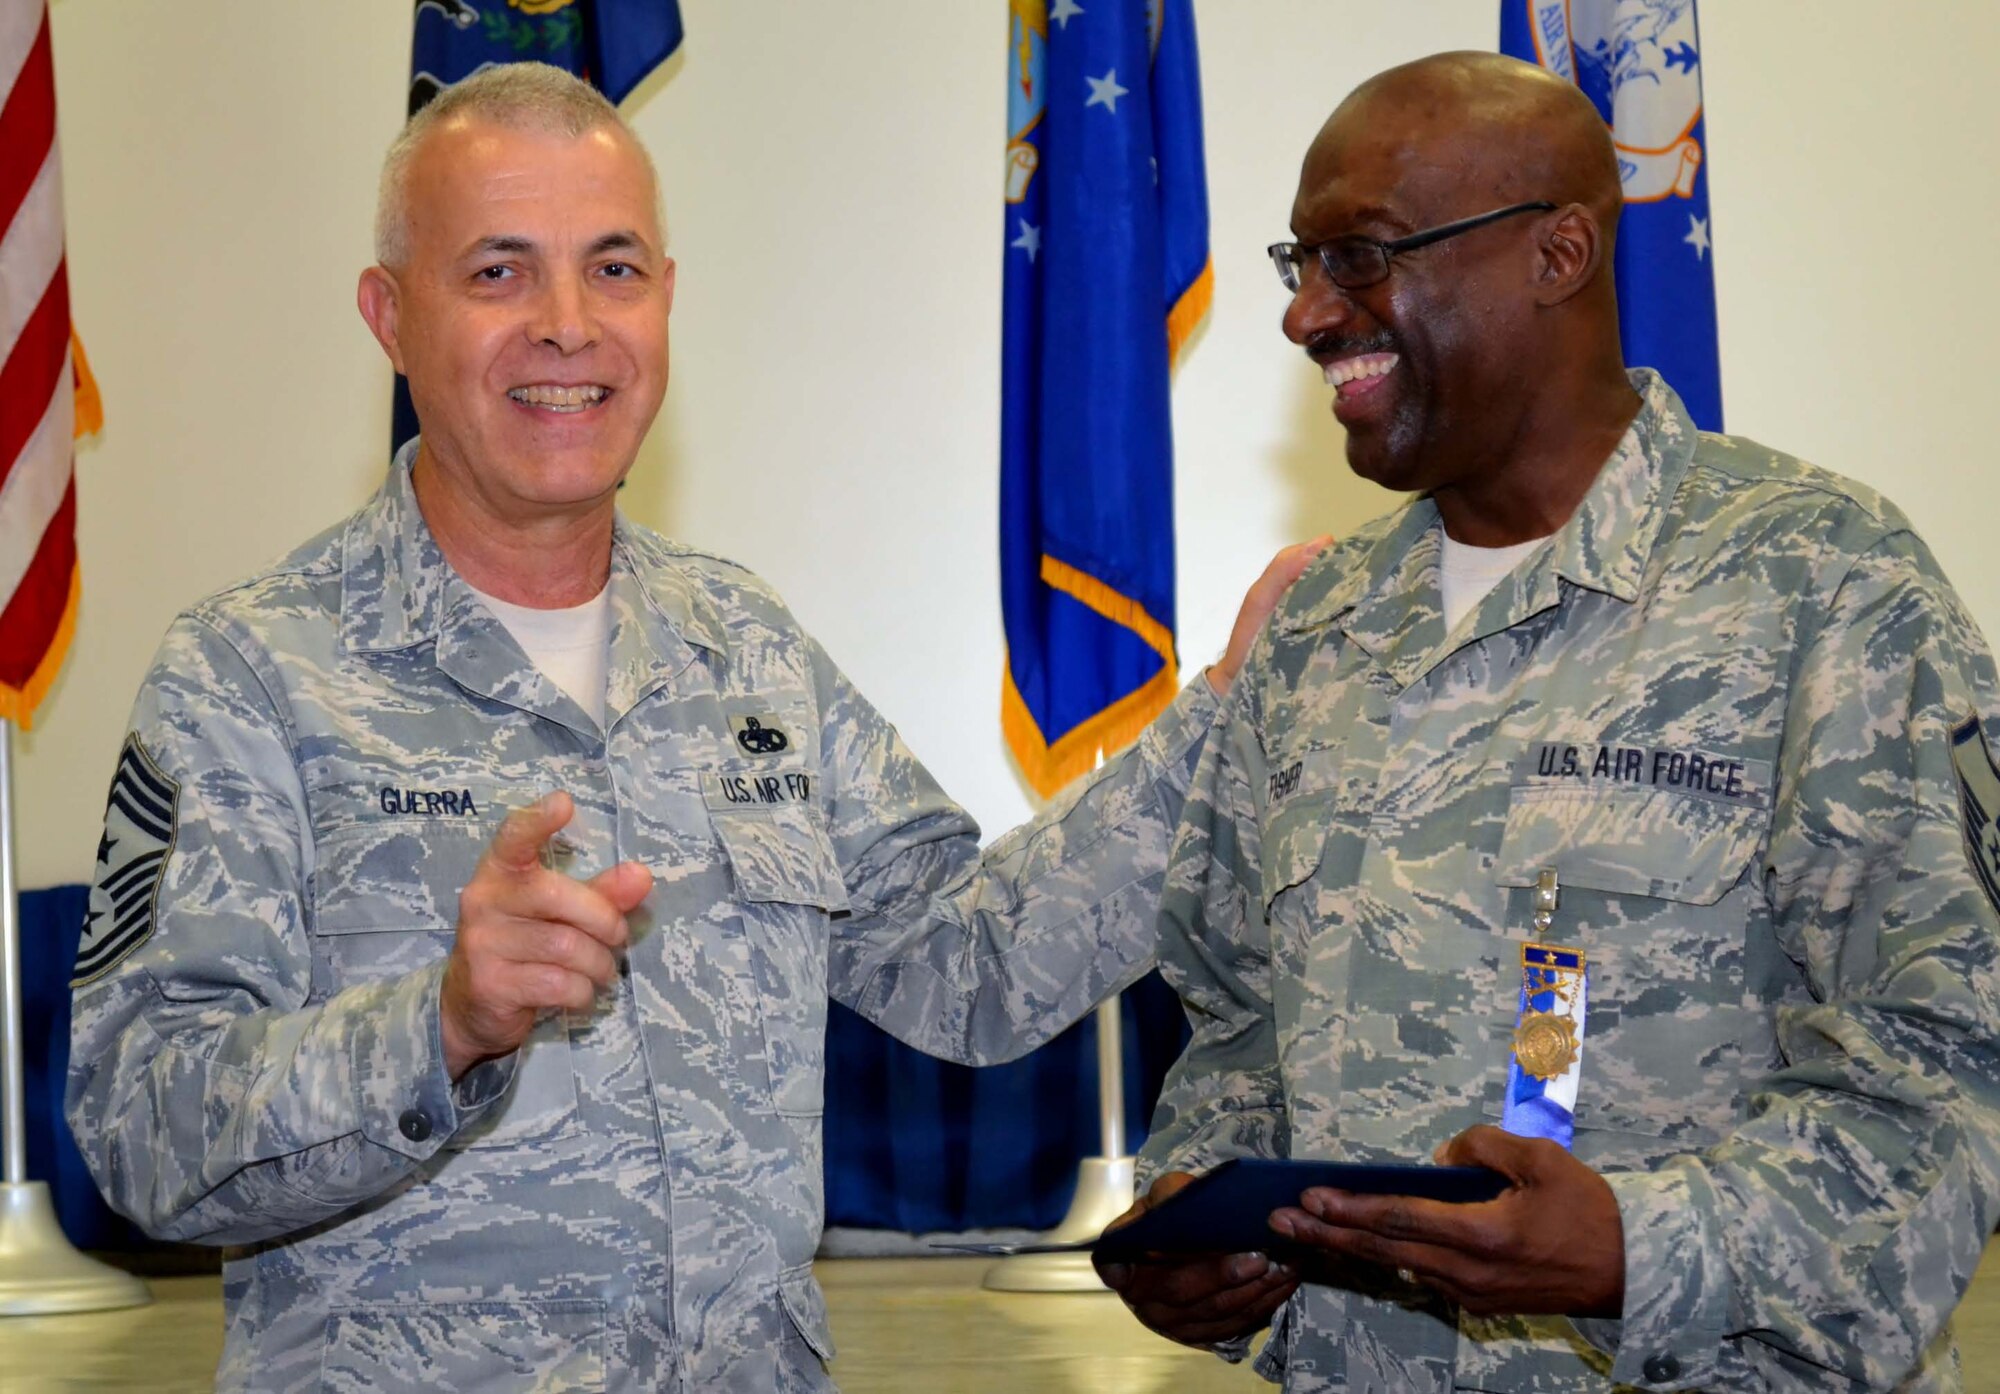 Pa. Air National Guard Command Chief Victor Guerra, of the 171st Air Refueling Wing, Coraopolis, Pa., congratulates Master Sgt. Sylvester Fisher, the 111th Attack Wing student flight monitor, on being awarded the Pennsylvania Gen. William Moffat-Reilly Medal during a ceremony in the Wing headquarters building at Horsham Air Guard Station, Pa., Sept. 10, 2016. The medal is awarded to the service member with the longest continuous service in the Pa. National Guard – Army or Air Force. (U.S. Air Force photo by Tech. Sgt. Andria Allmond)